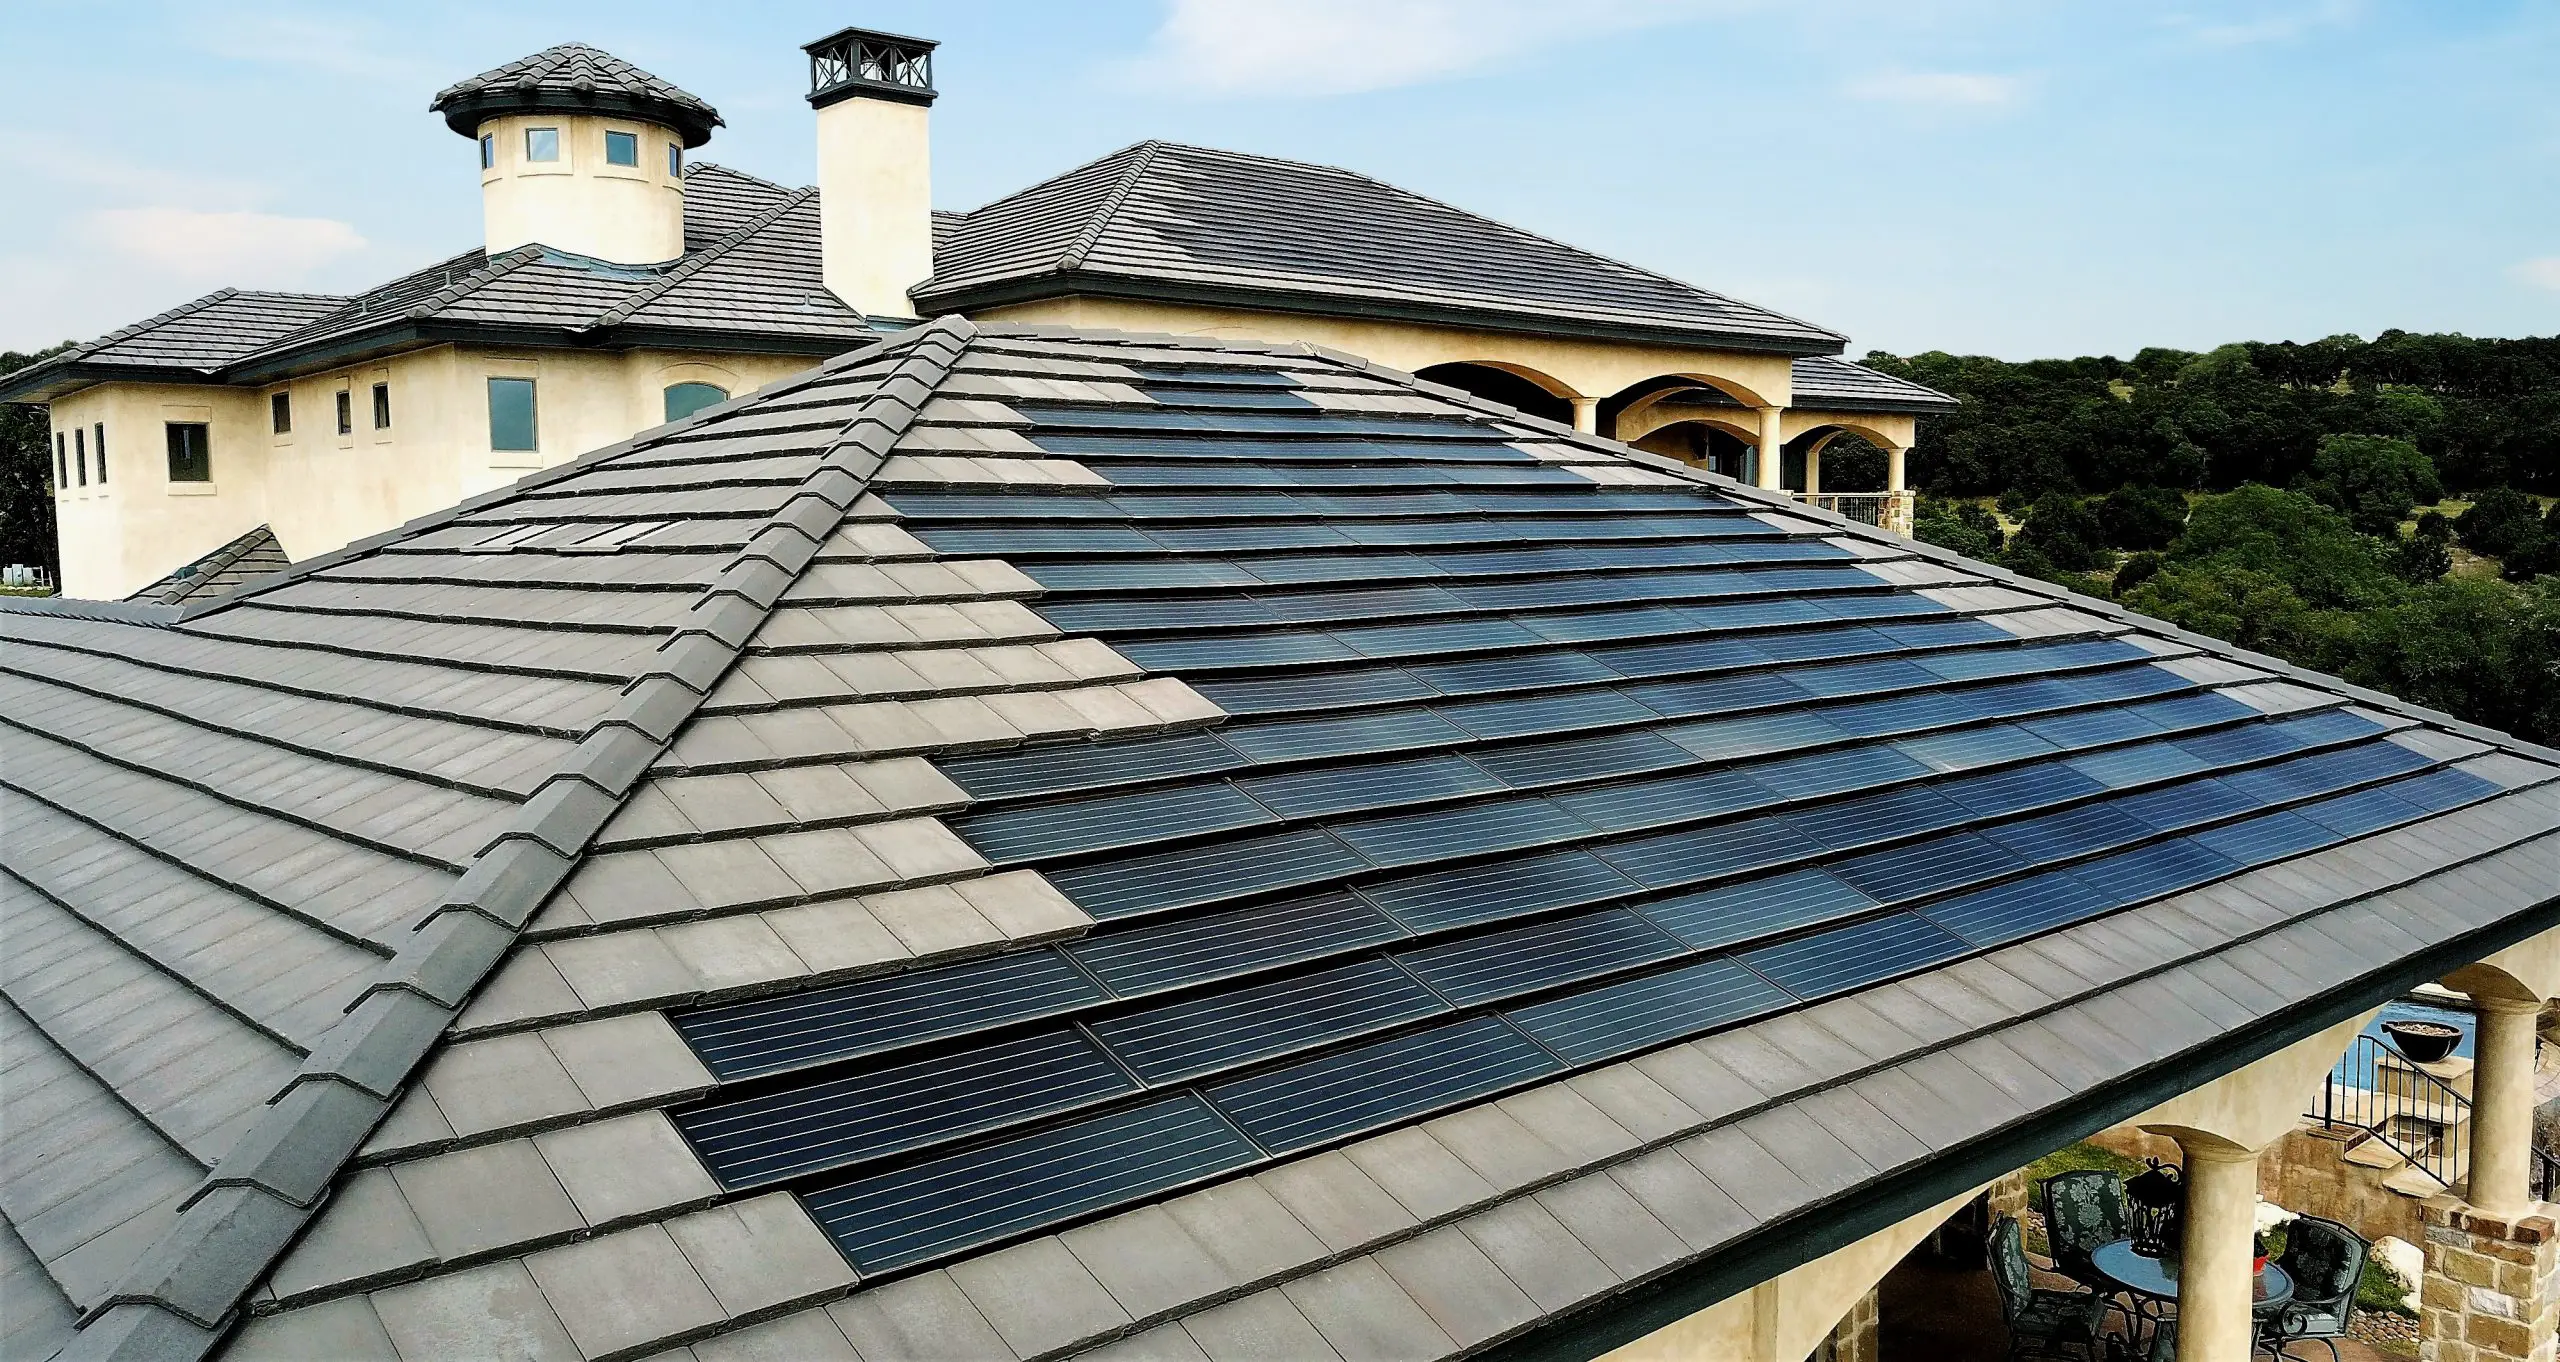 Apollo Tile II Solar Roofing System from CertainTeed Corporation